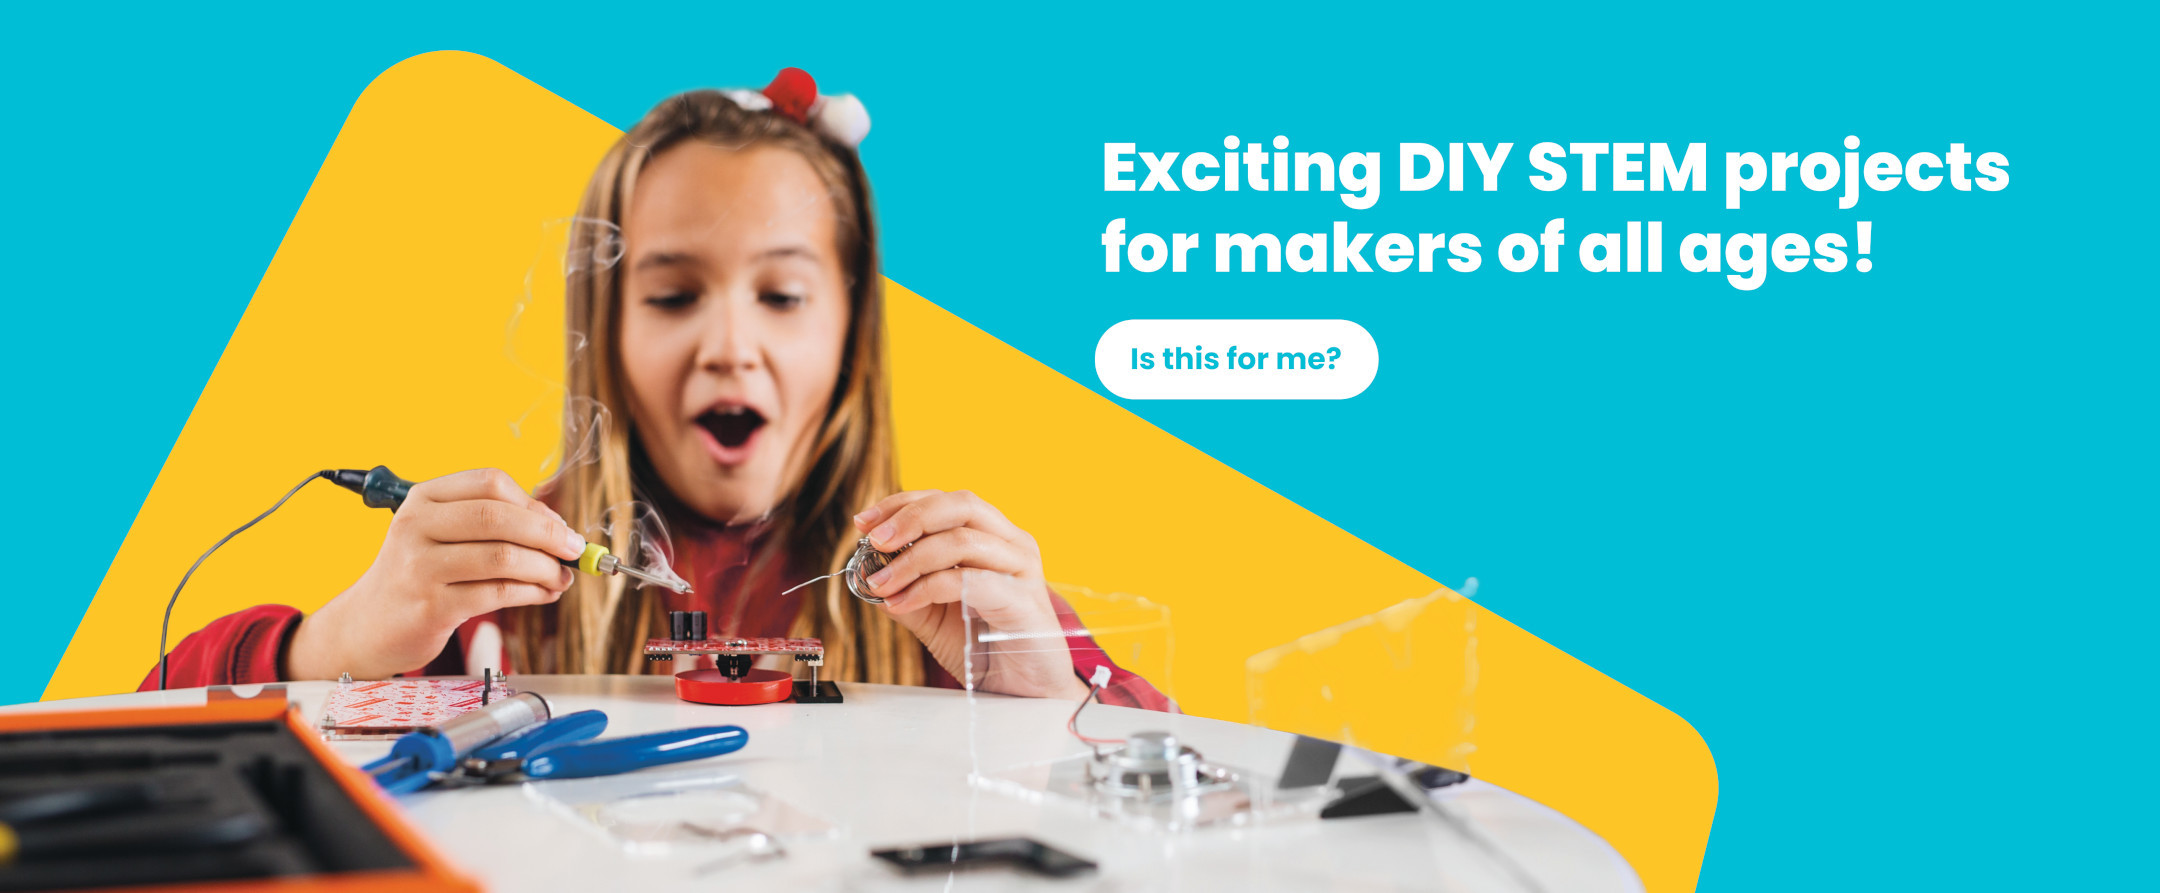 Fullwidth section: Exciting DIY STEM projects for makers of all ages!